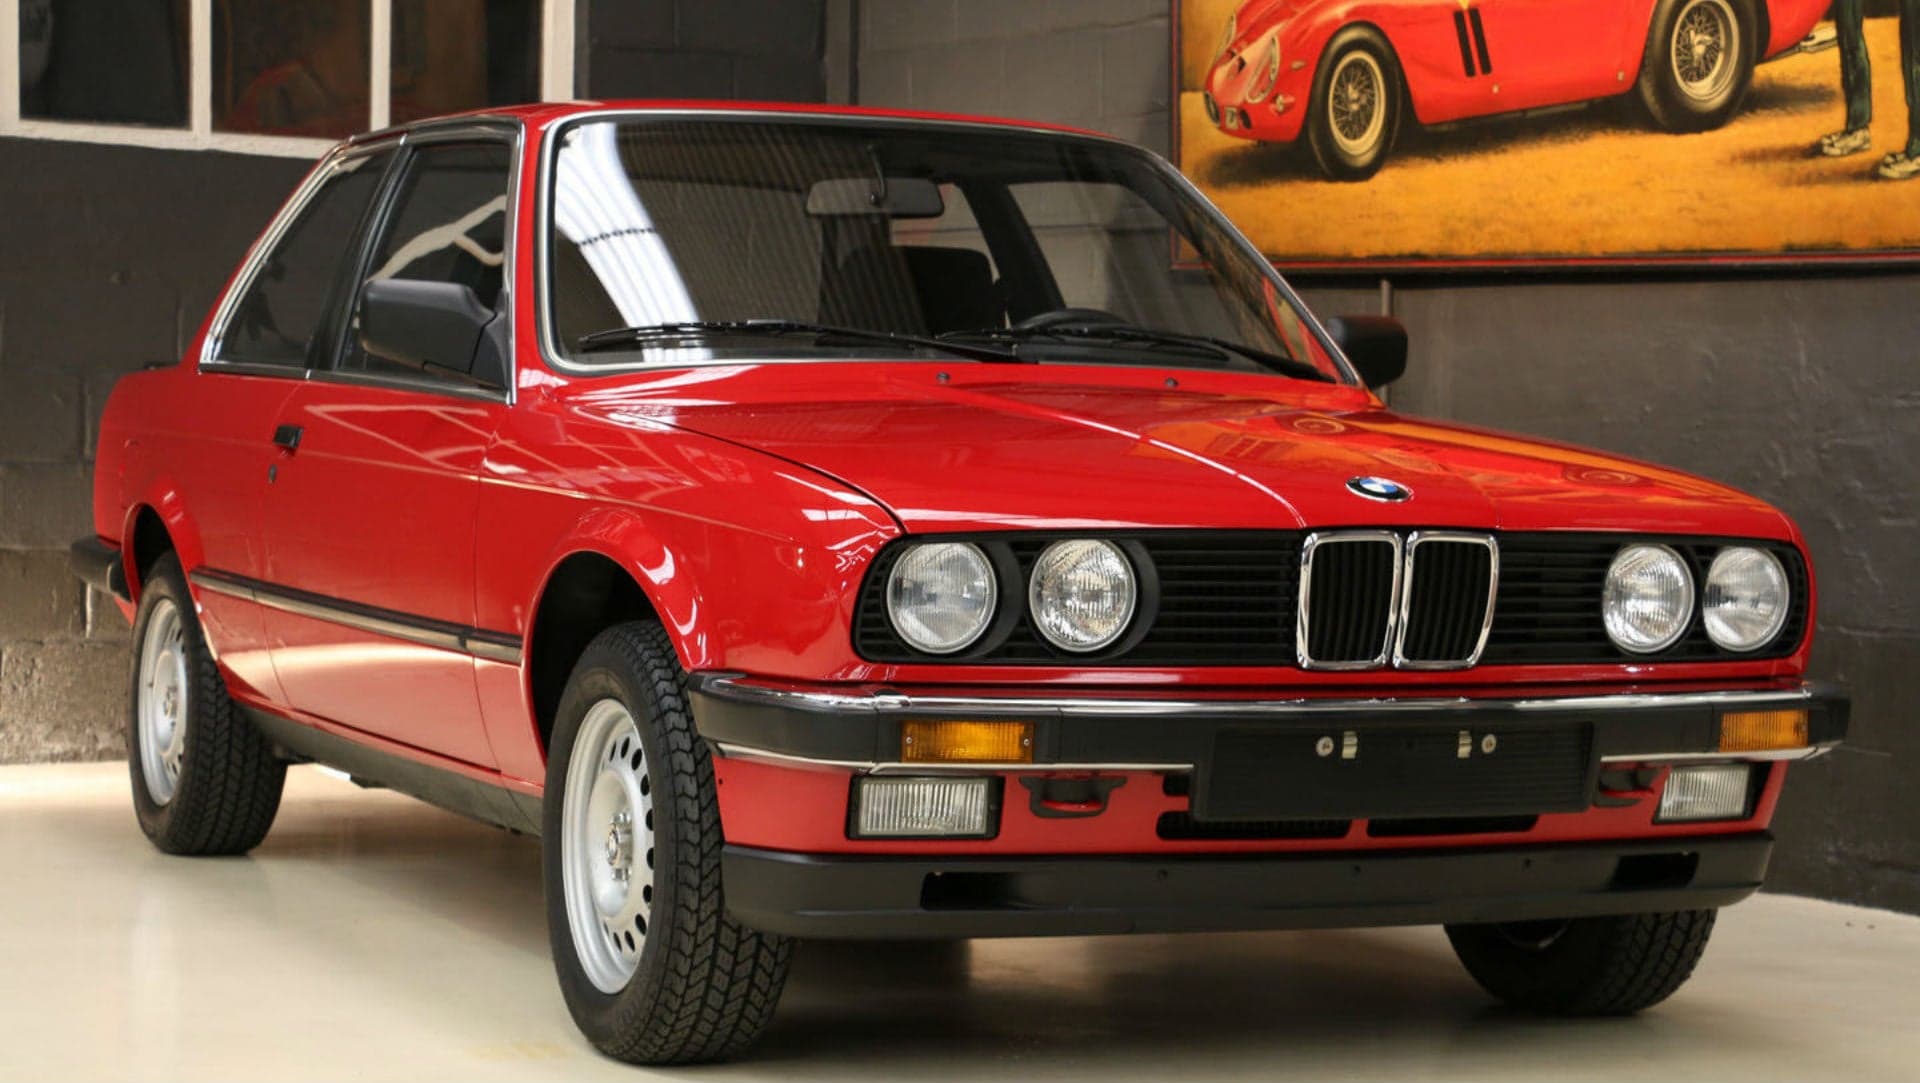 You Could Buy This Like-New 162-Mile BMW E30 For $82,000